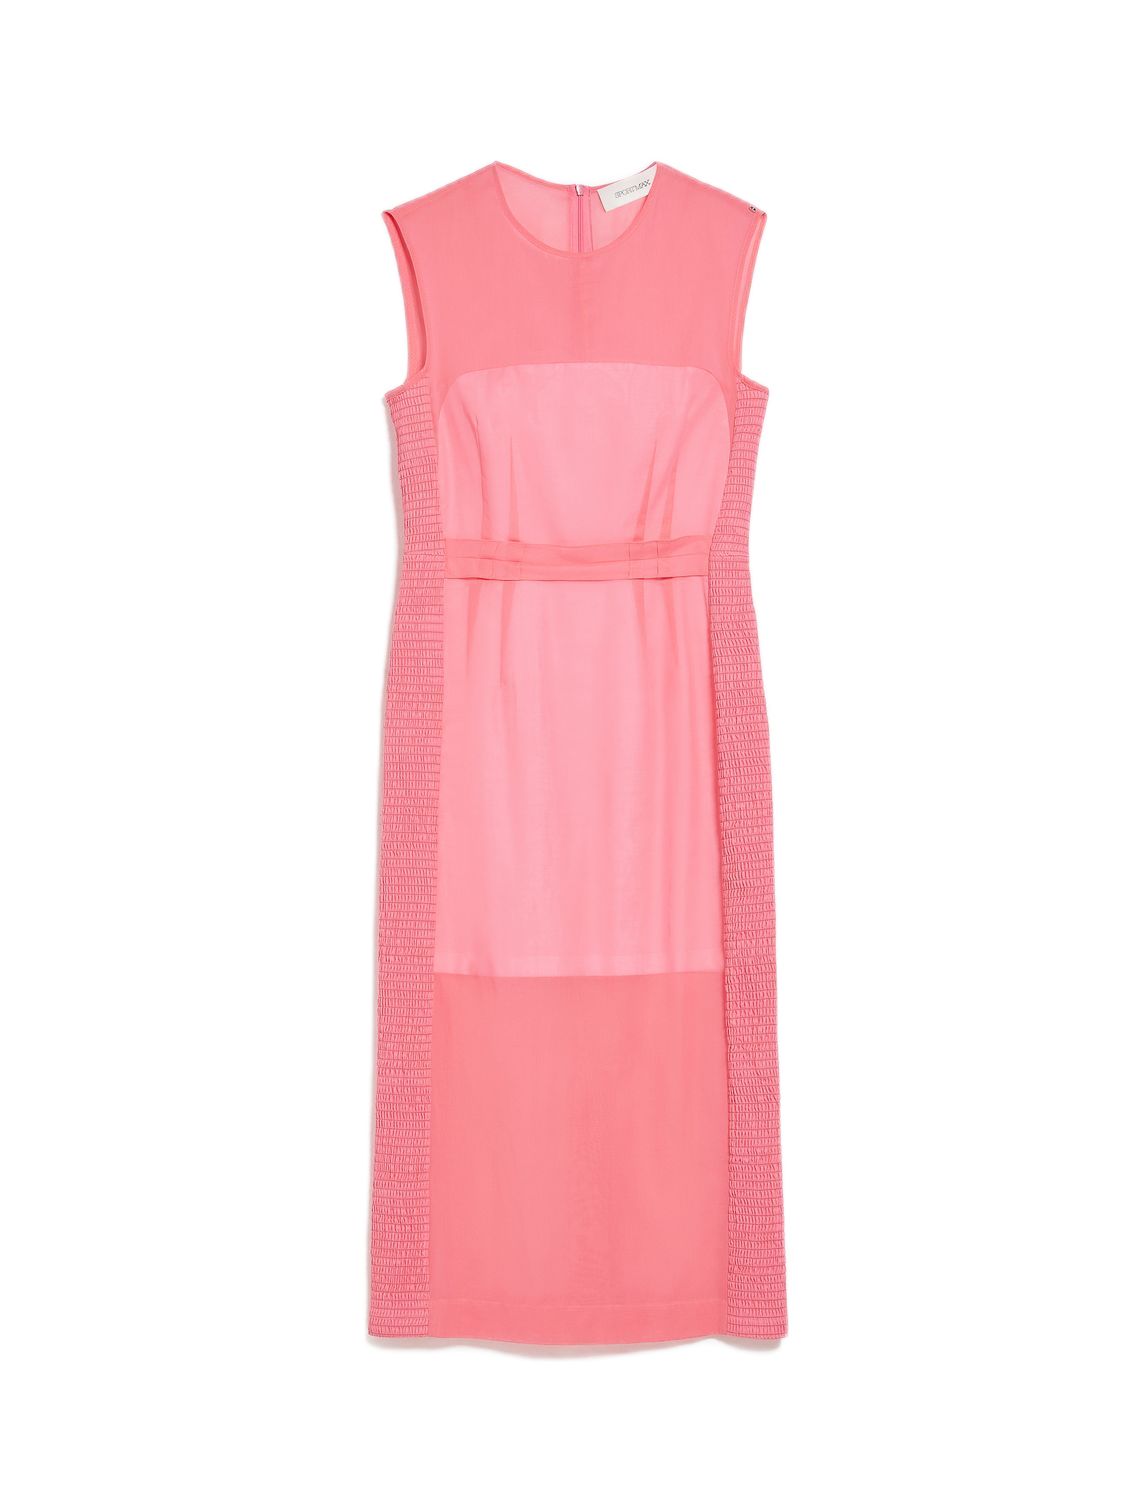 MAX MARA SPORTMAX Light and Breezy Cotton Dress for Women - Perfect for Spring/Summer Wardrobe